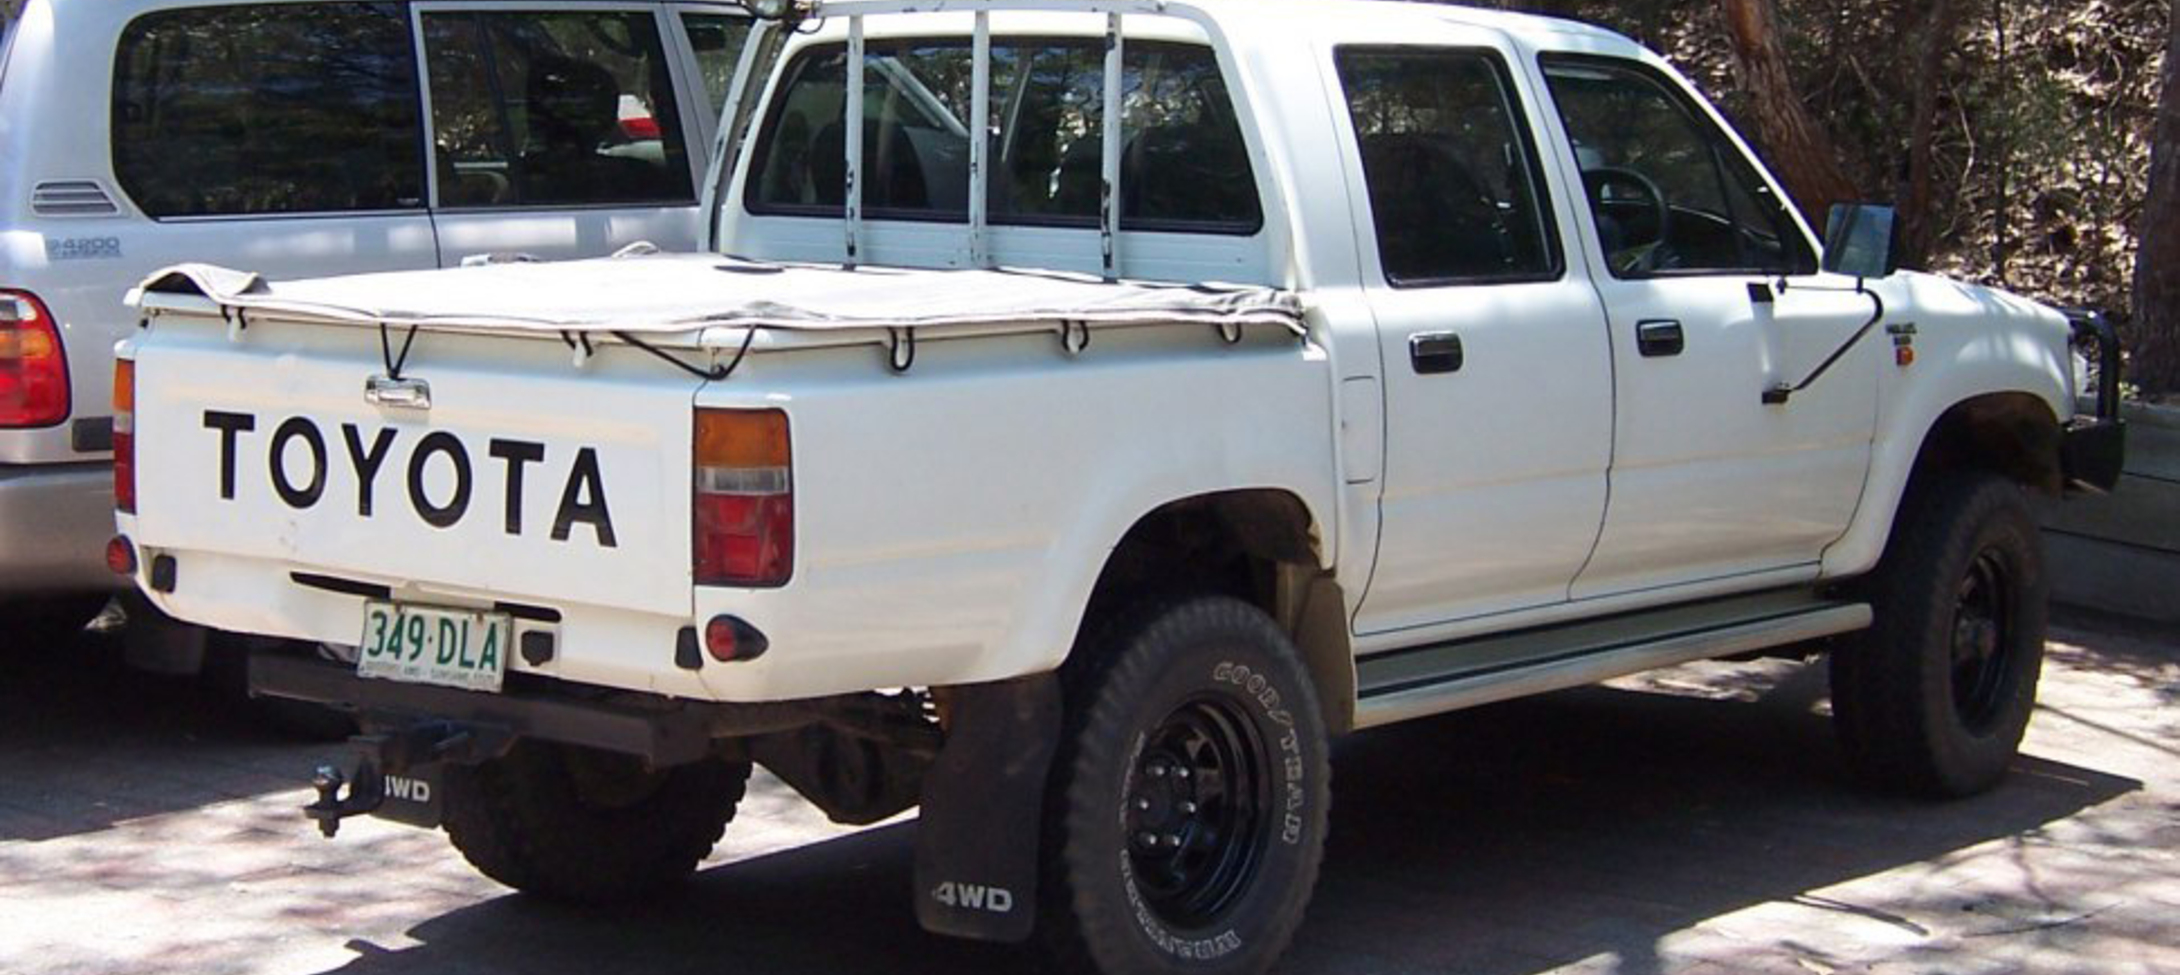 Toyota Hilux Pick Up 2.8 D (91 Hp) 1991, 1992, 1993, 1994, 1995, 1996, 1997 